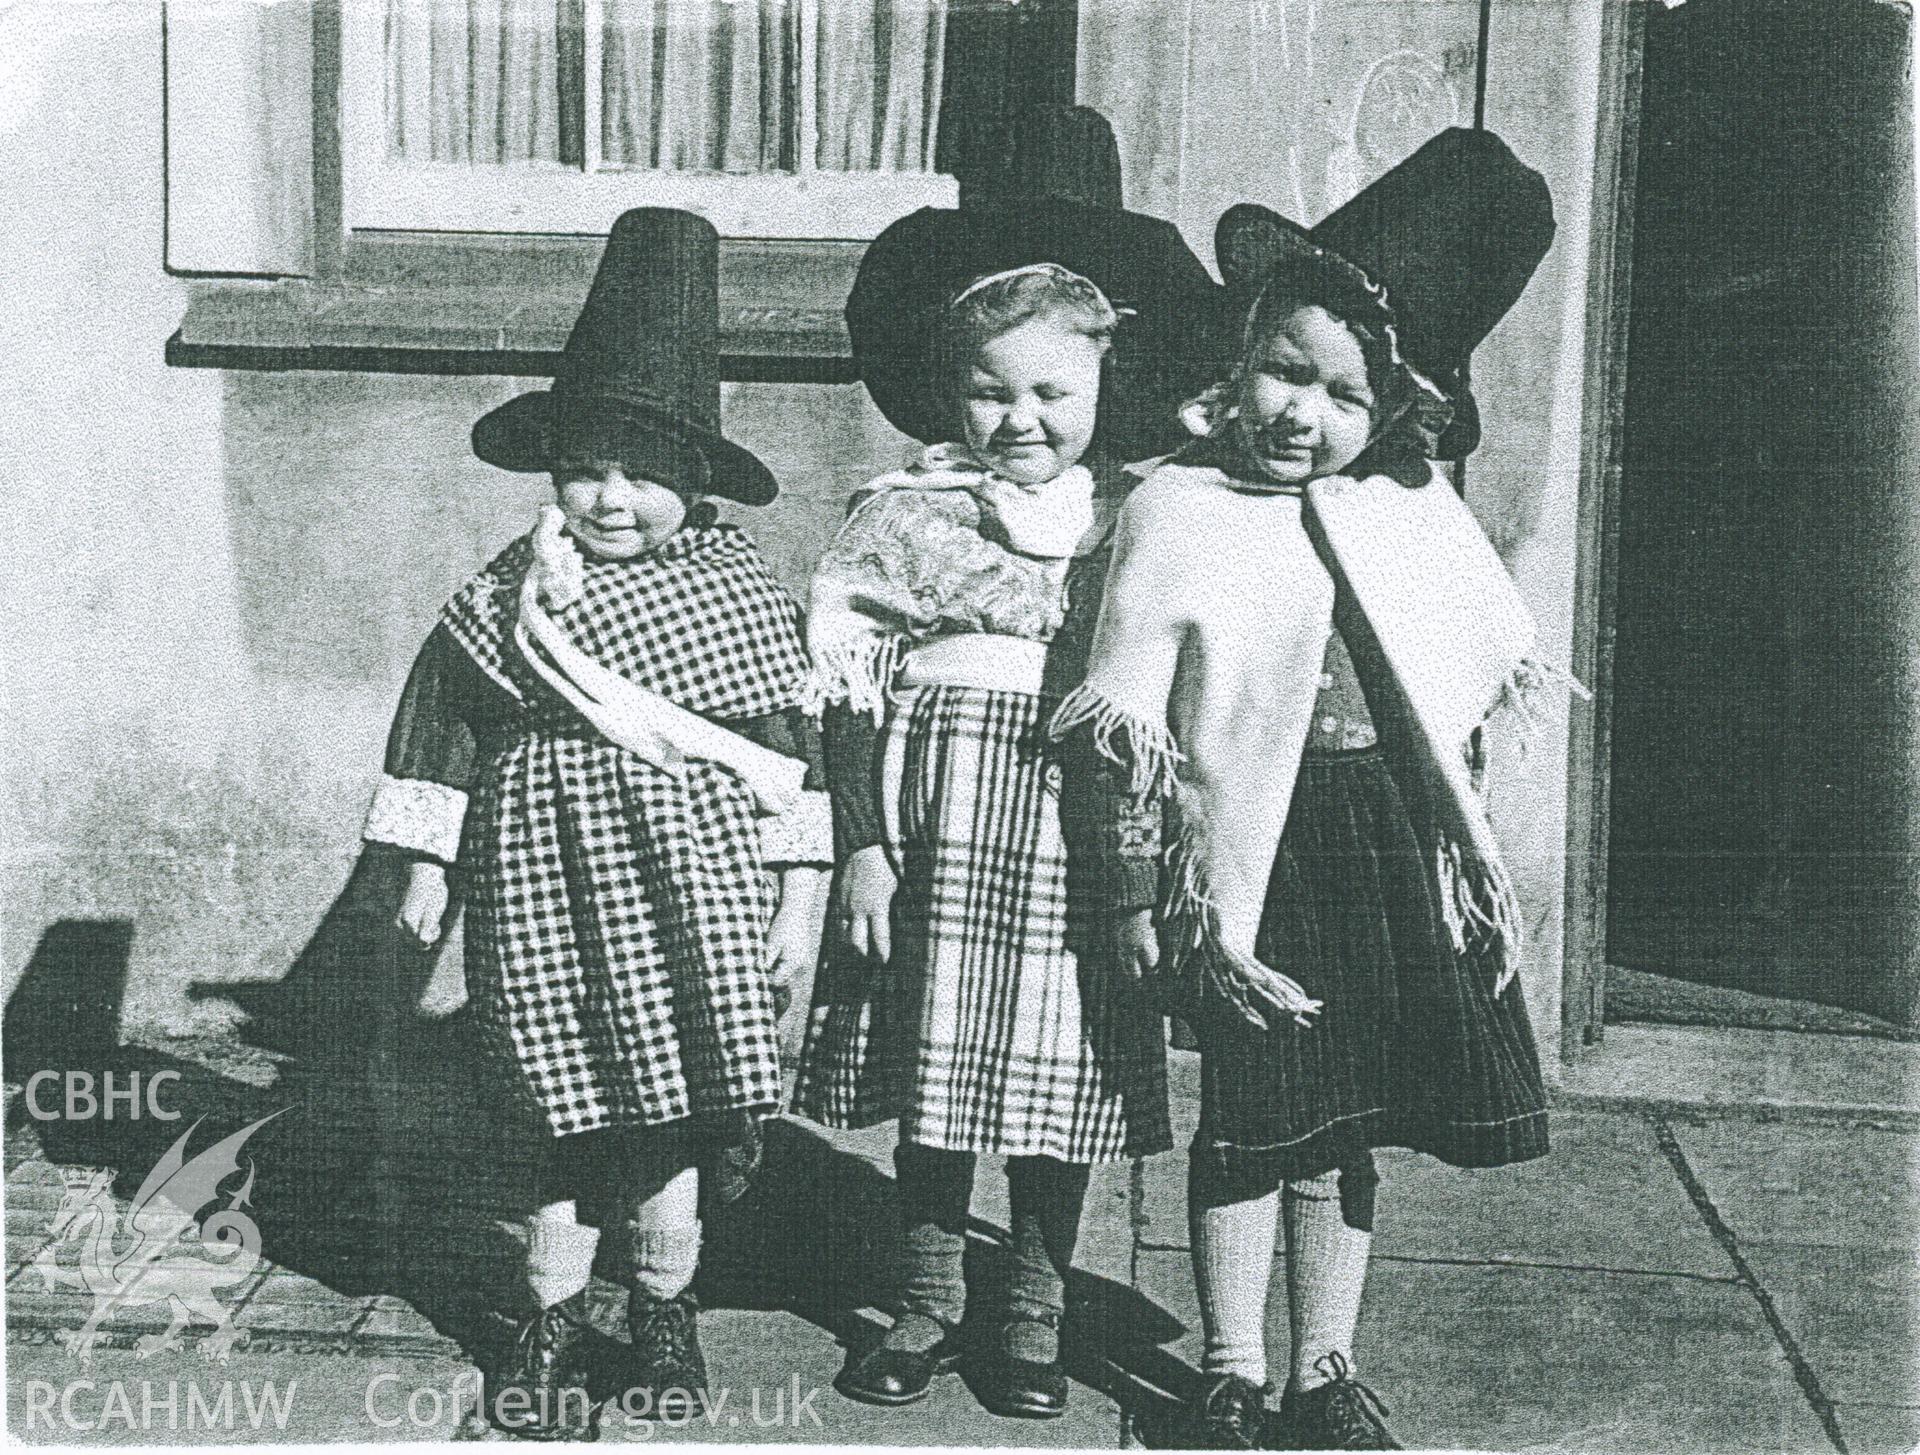 Black and white photograph of three girls in Welsh costume at first Welsh school in Maesteg, circa 1953. Donated to the RCAHMW by Cyril Philips as part of the Digital Dissent Project.